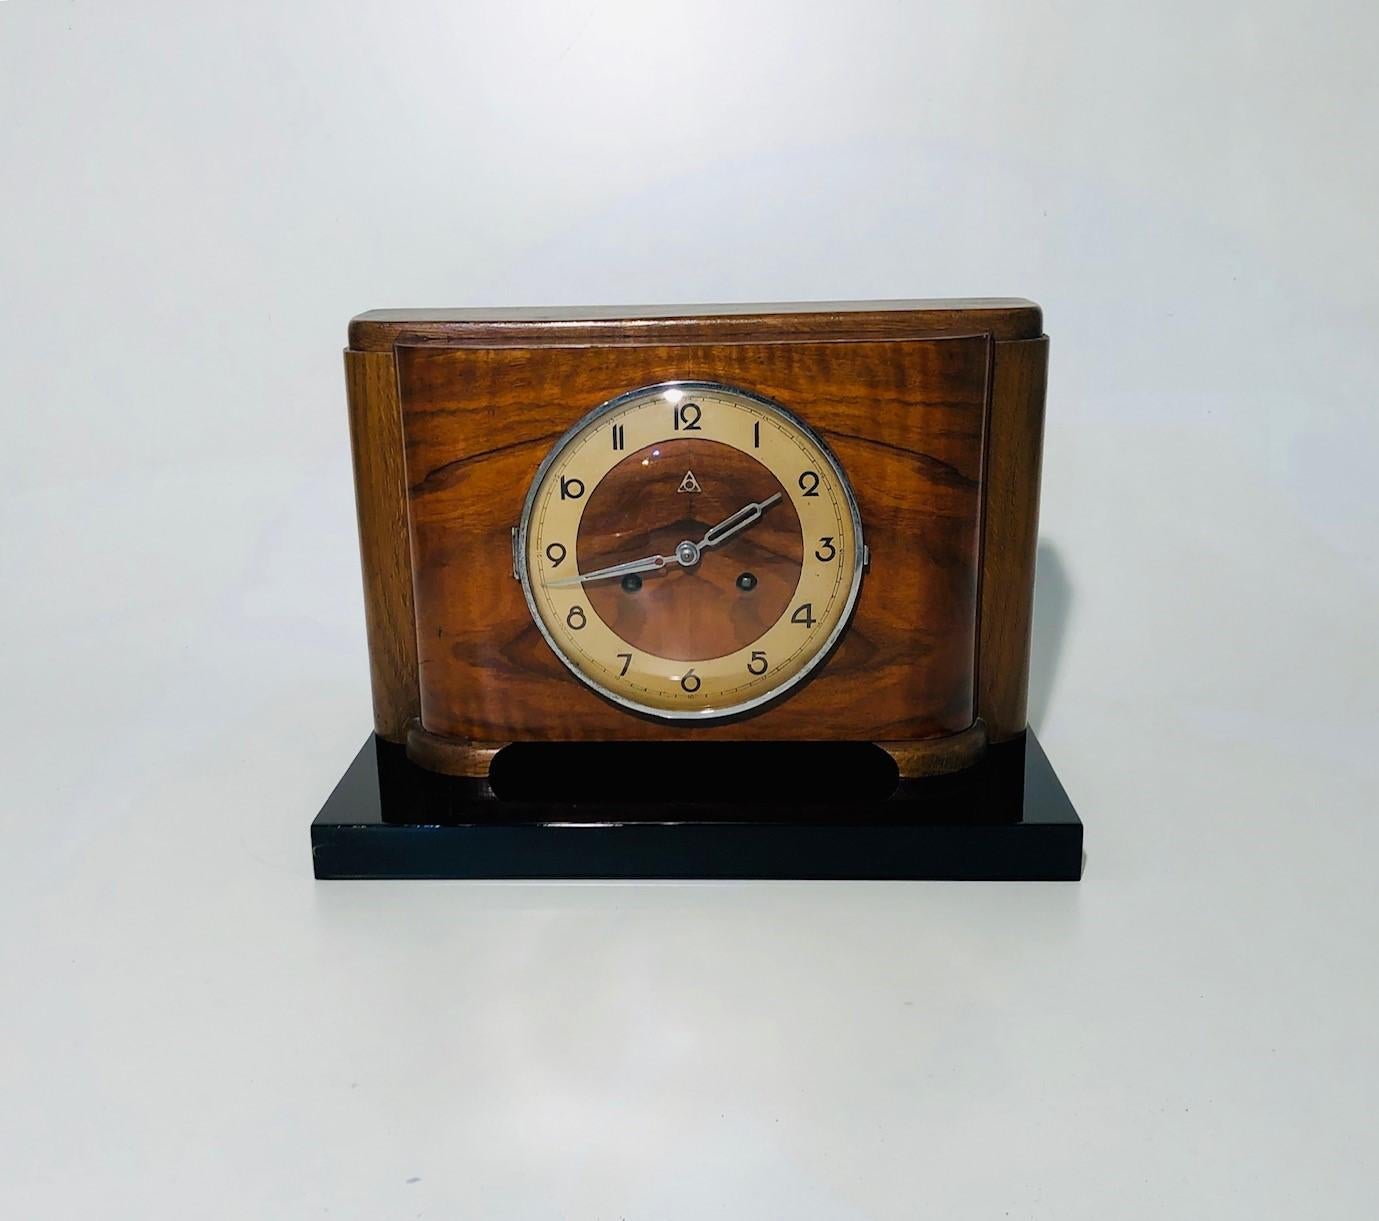 Very beautiful table / buffet / mantelpiece clock from the 1920s manufactured by Alpina. This is a great, functional specially made Art Deco desk clock from Germany. It is in good condition, with an intact dial and a restored and newly varnished